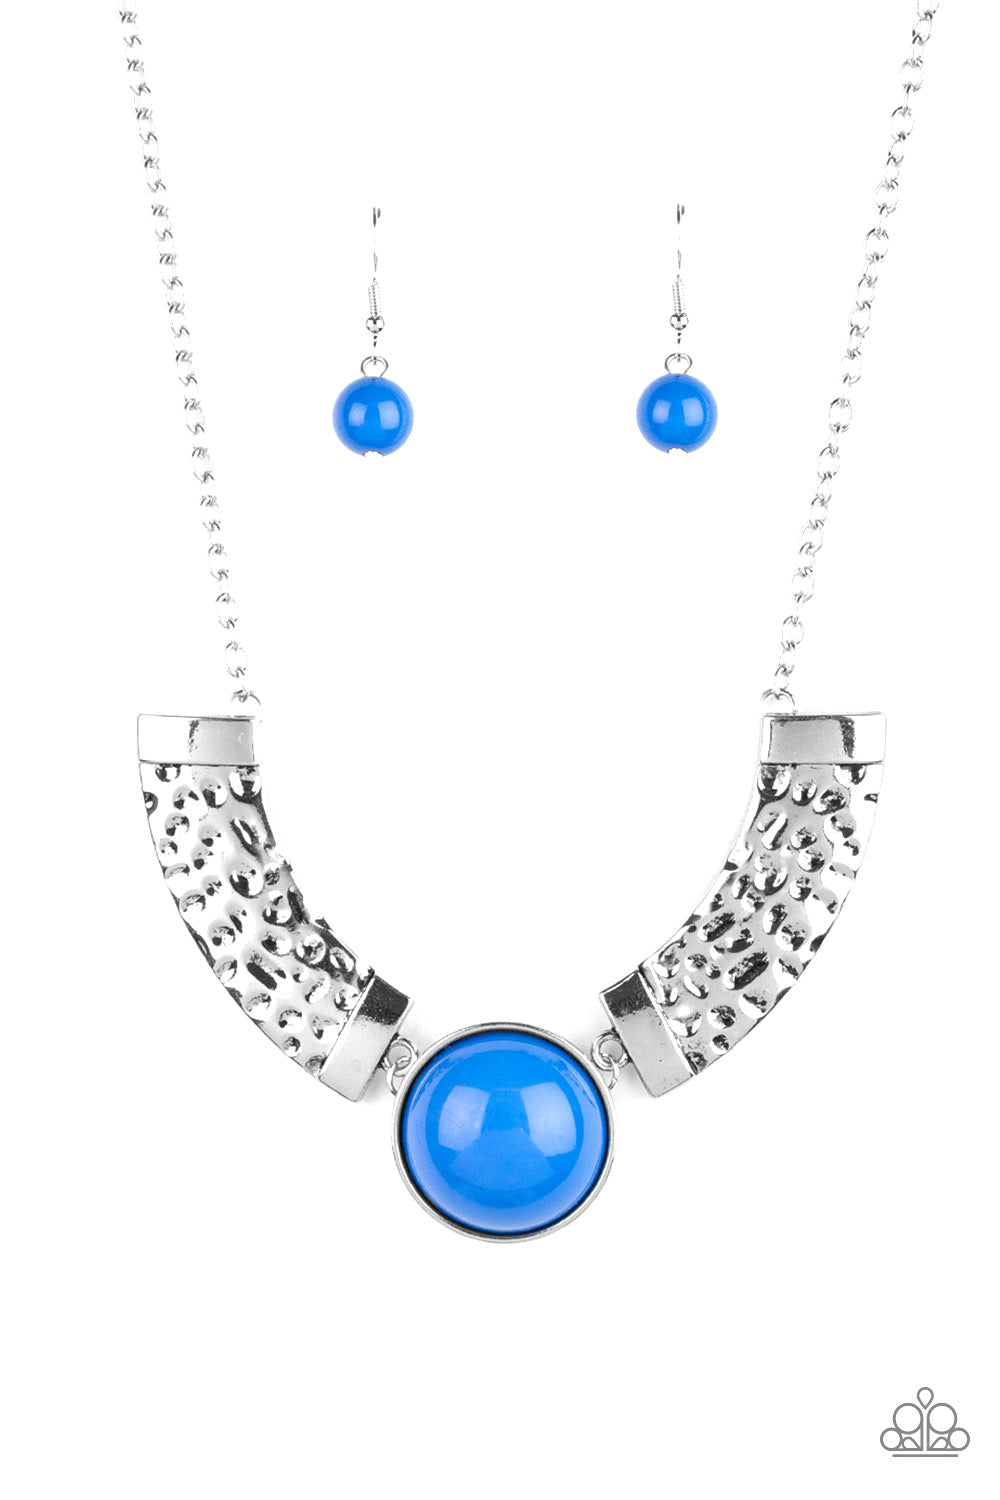 EGYPTIAN SPELL - BLUE NECKLACE